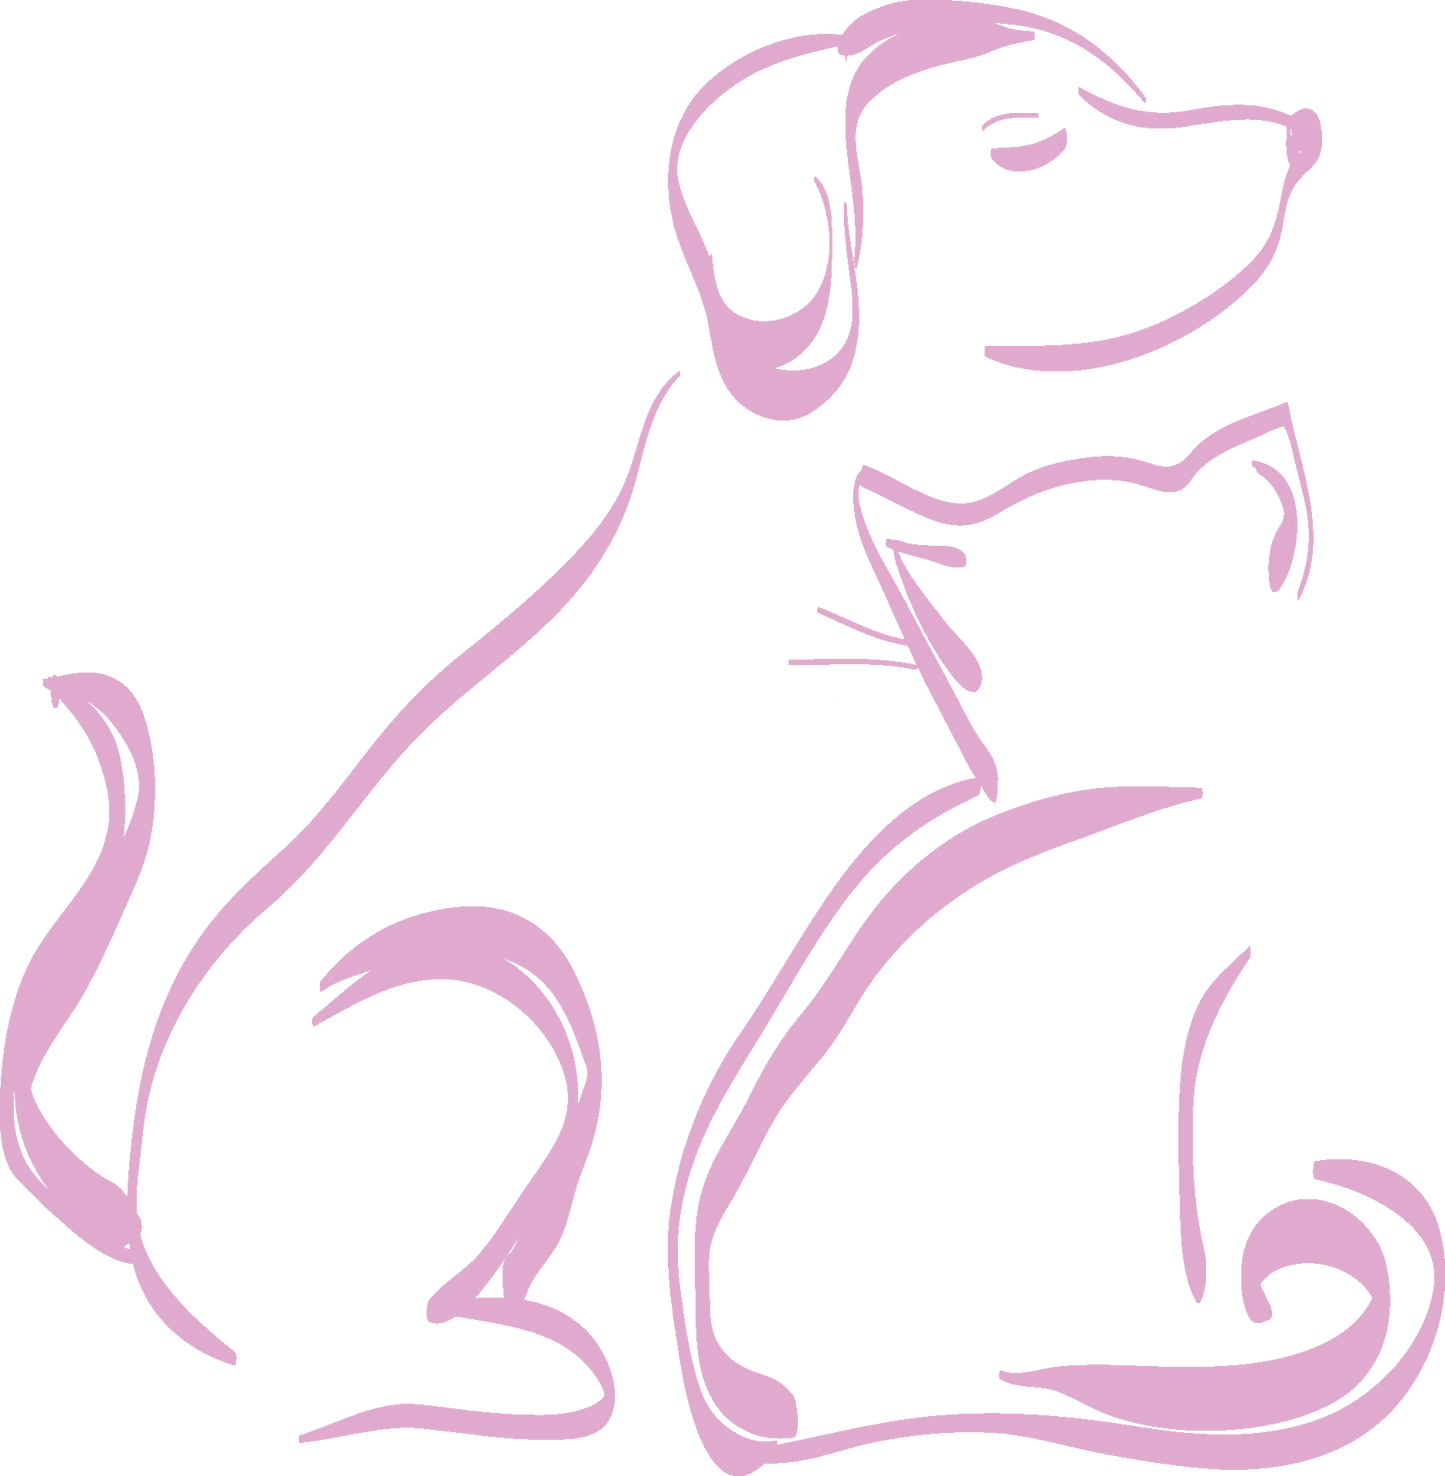 Dog and Cat Friends Vinyl Decal - 6 Colors